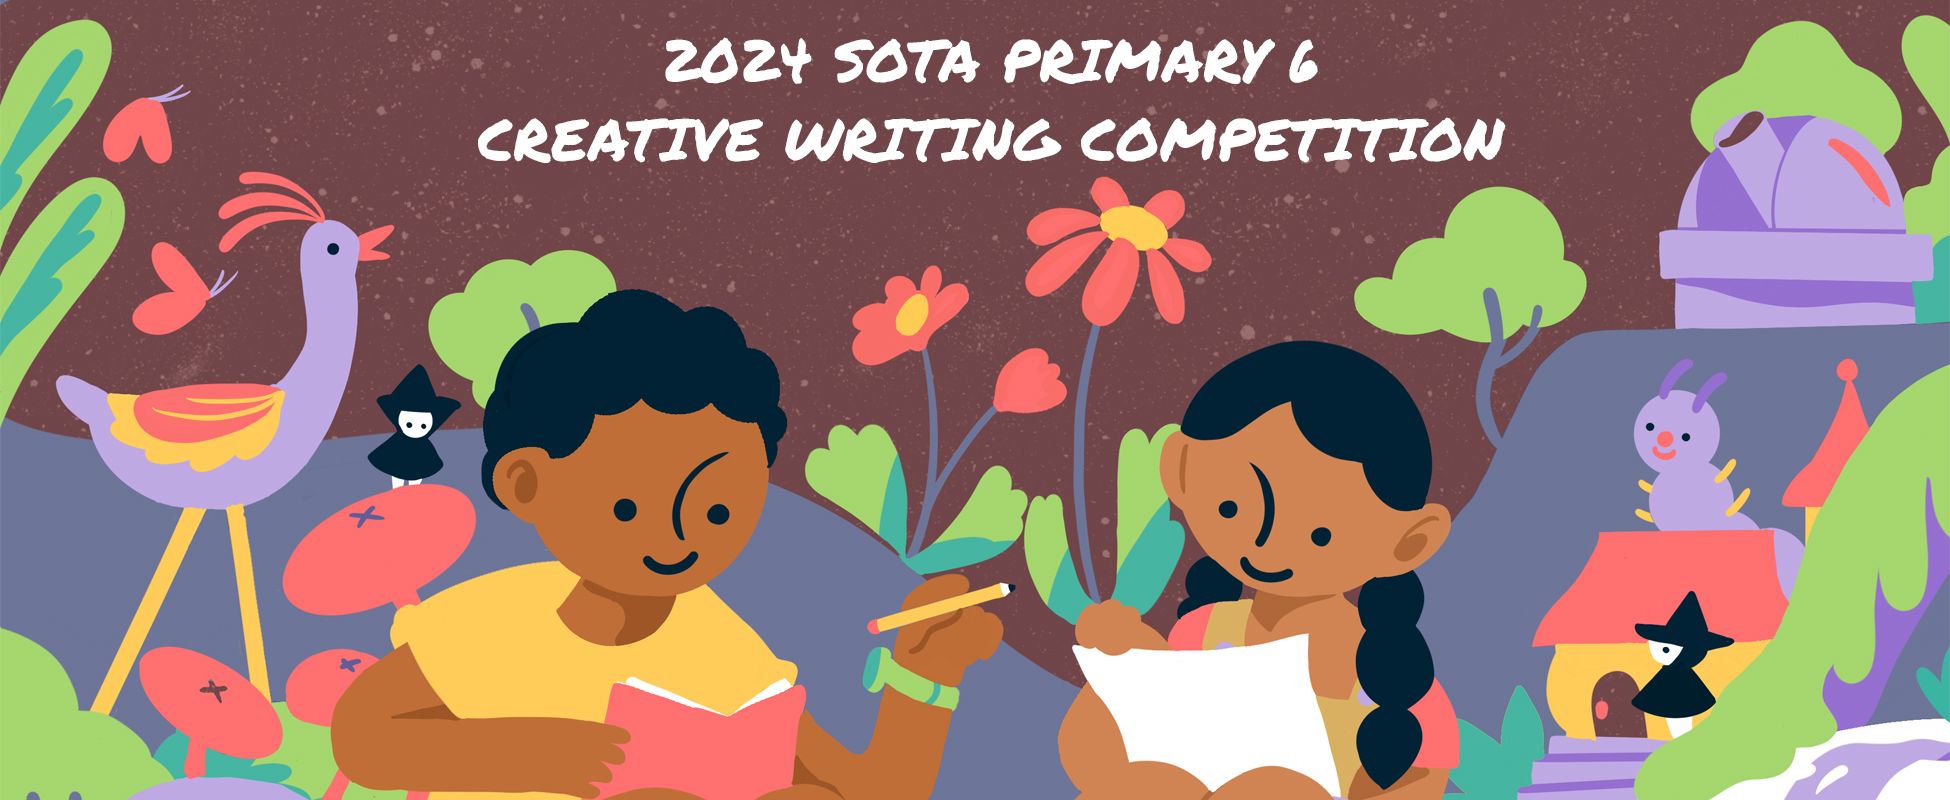 SOTA PRIMARY 6 Creative Writing Competition